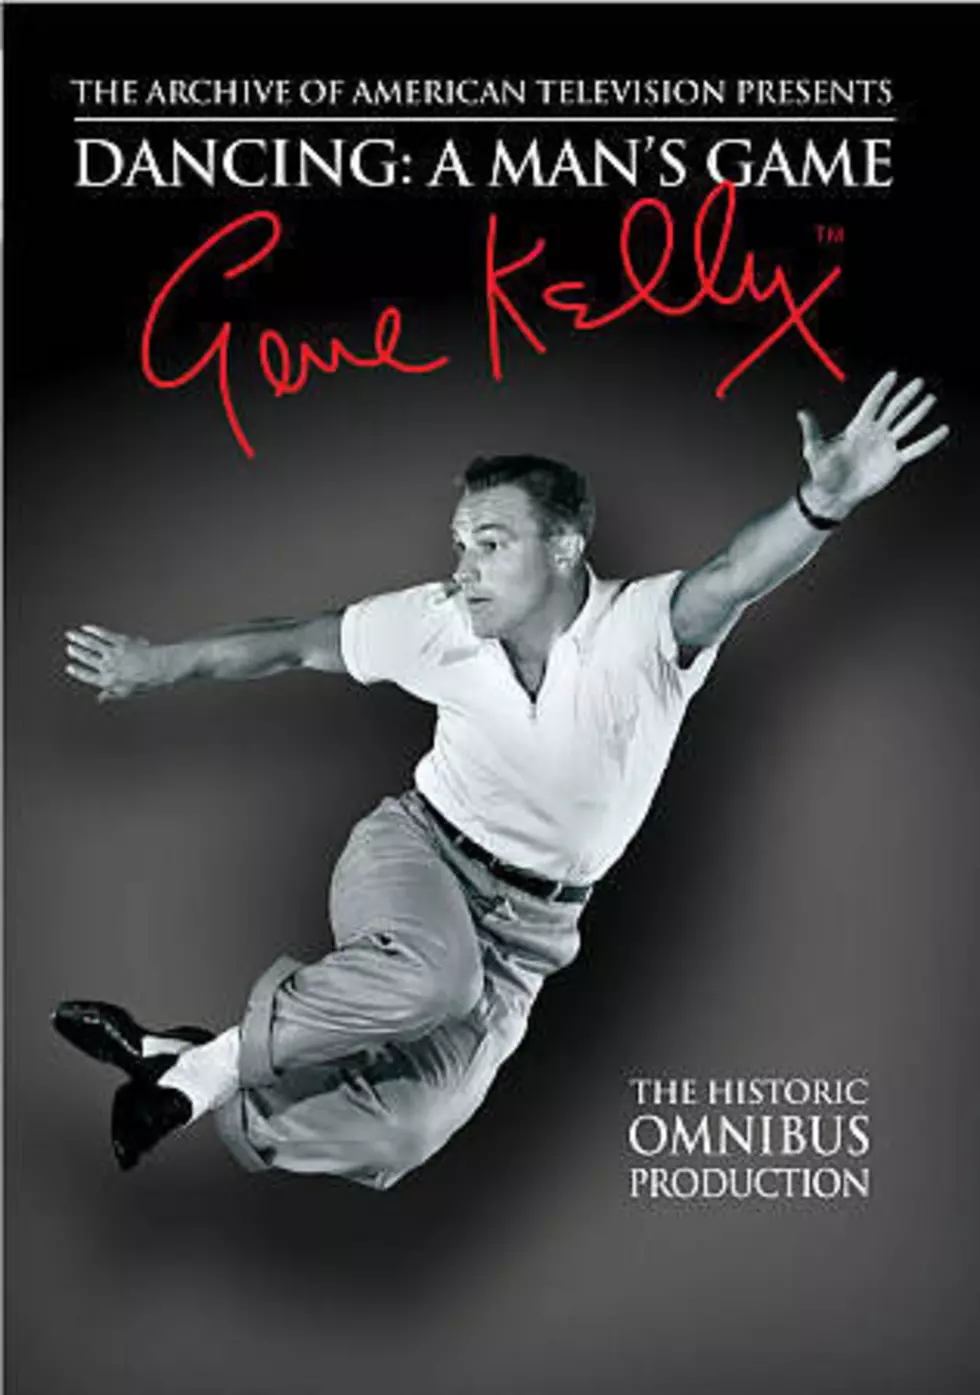 A Video That Will Get You Dancing: Connie Francis and Gene Kelly! (VIDEO)